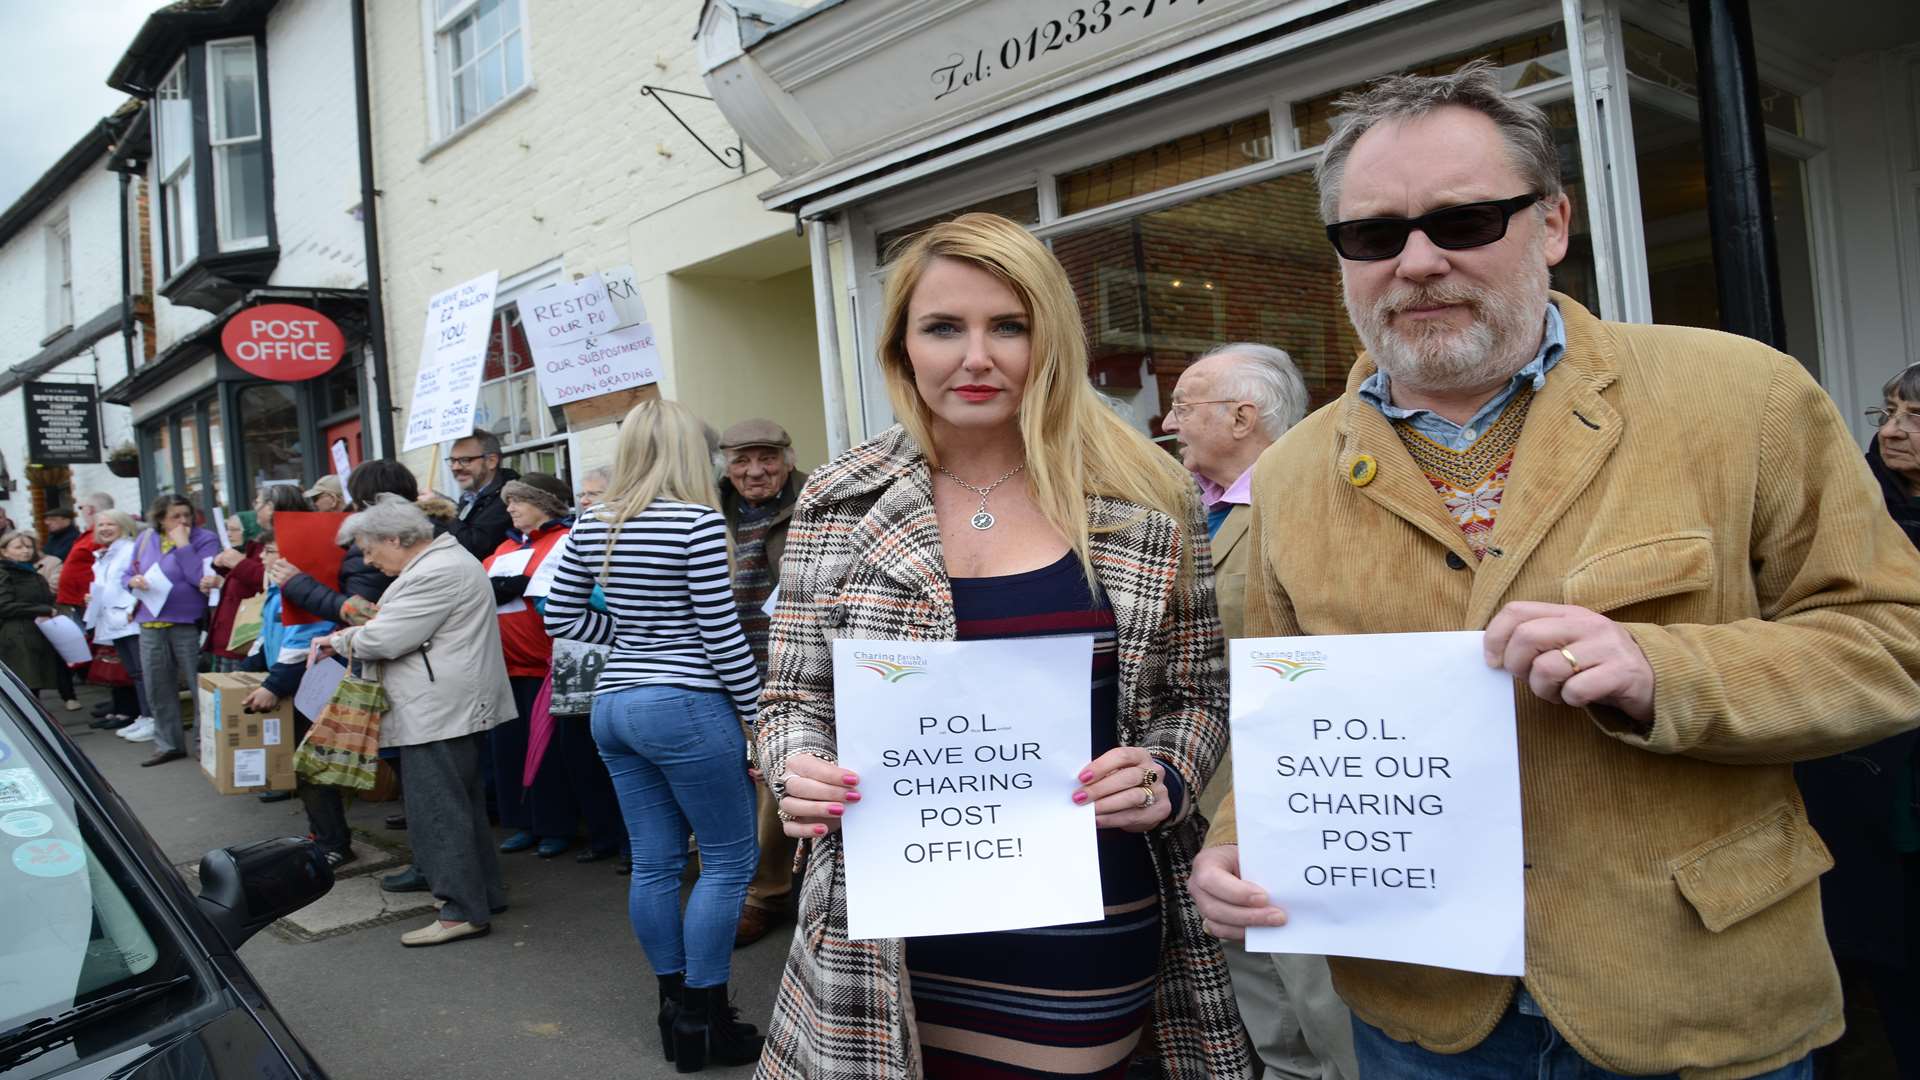 Nancy Sorrell and Vic Reeves amongst the protesters in the village